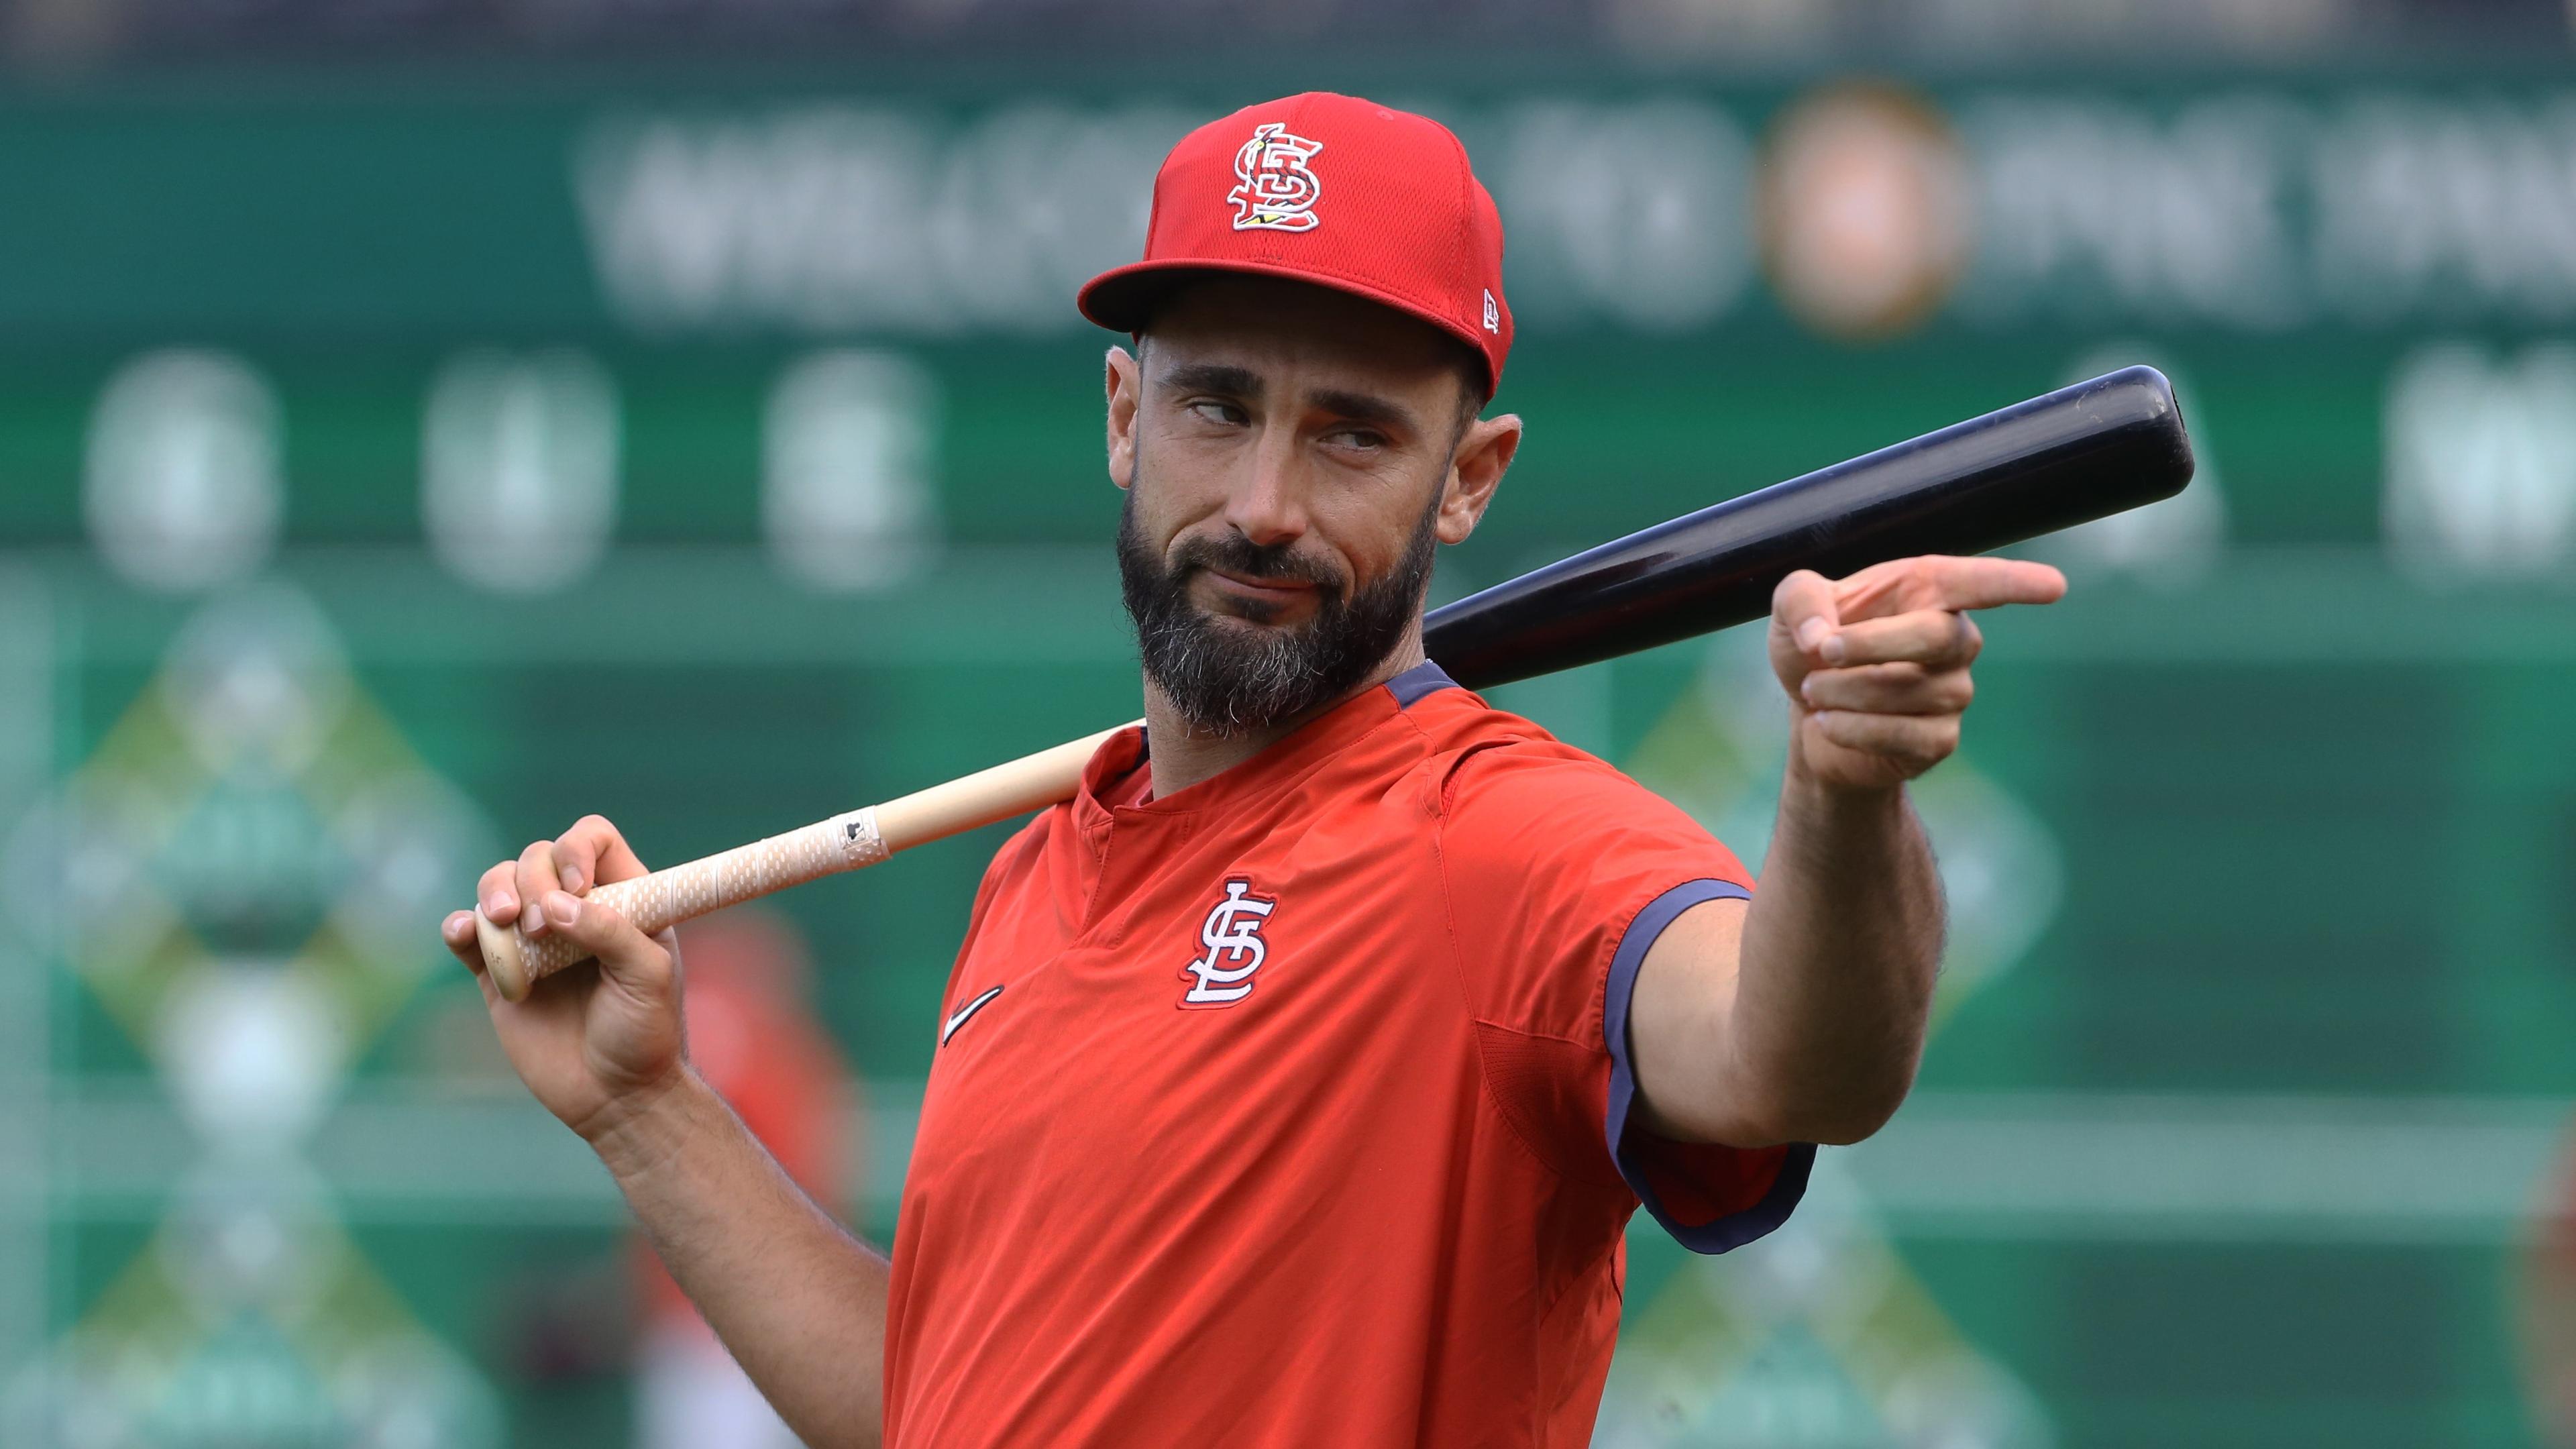 St. Louis Cardinals infielder Matt Carpenter (13) gestures at the batting cage before the game against the Pittsburgh Pirates at PNC Park. / Charles LeClaire-USA TODAY Sports